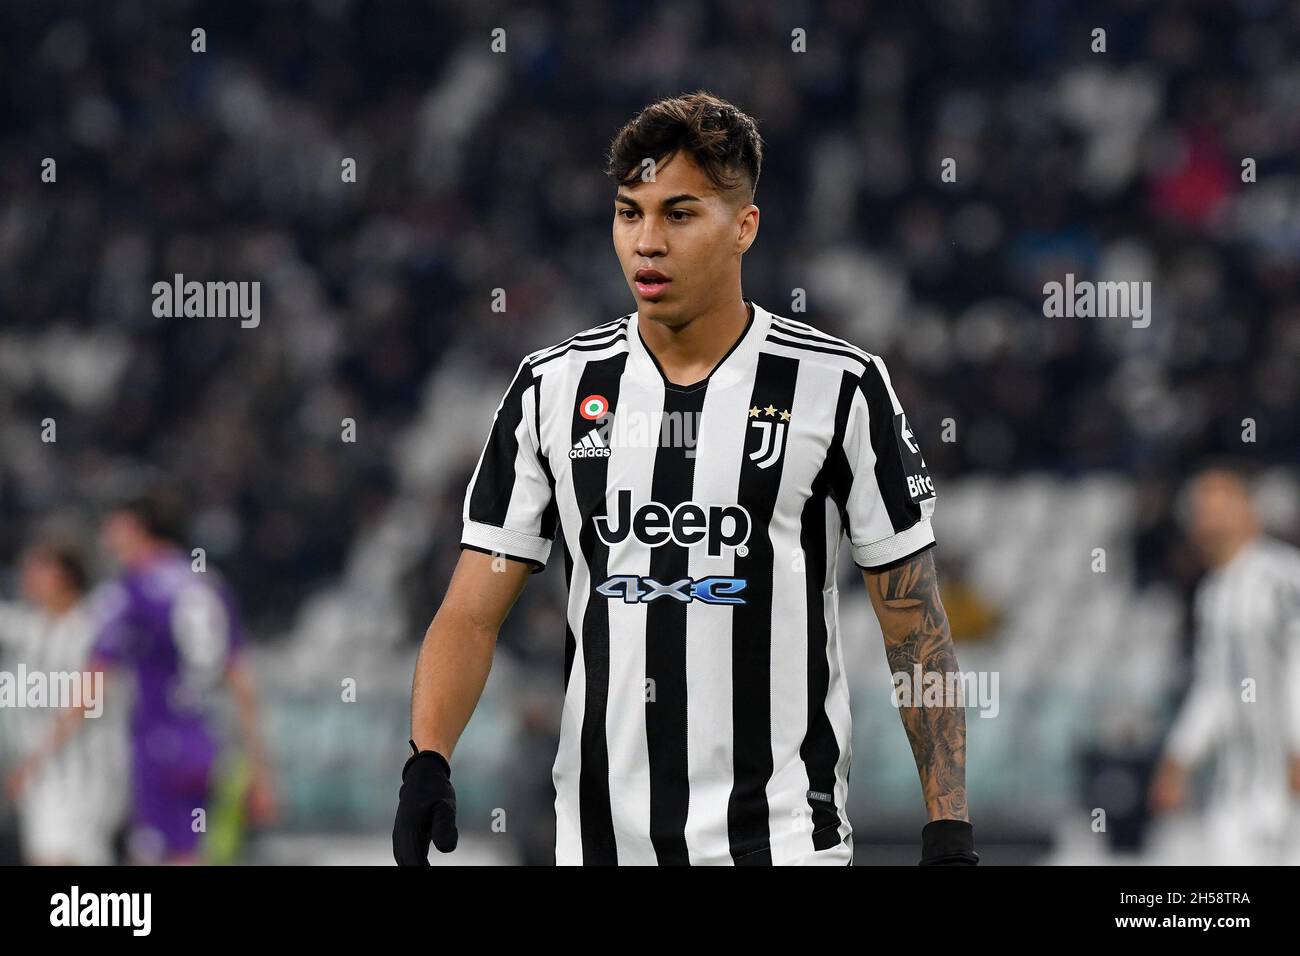 Turin, Italy. 06th Nov, 2021. Kaio Jorge of Juventus FC in action during the Serie A 2020/21 match between Juventus FC and ACF Fiorentina at Allianz Stadium on November 06, 2021 in Turin, Italy Photo ReporterTorino Credit: Independent Photo Agency/Alamy Live News Stock Photo